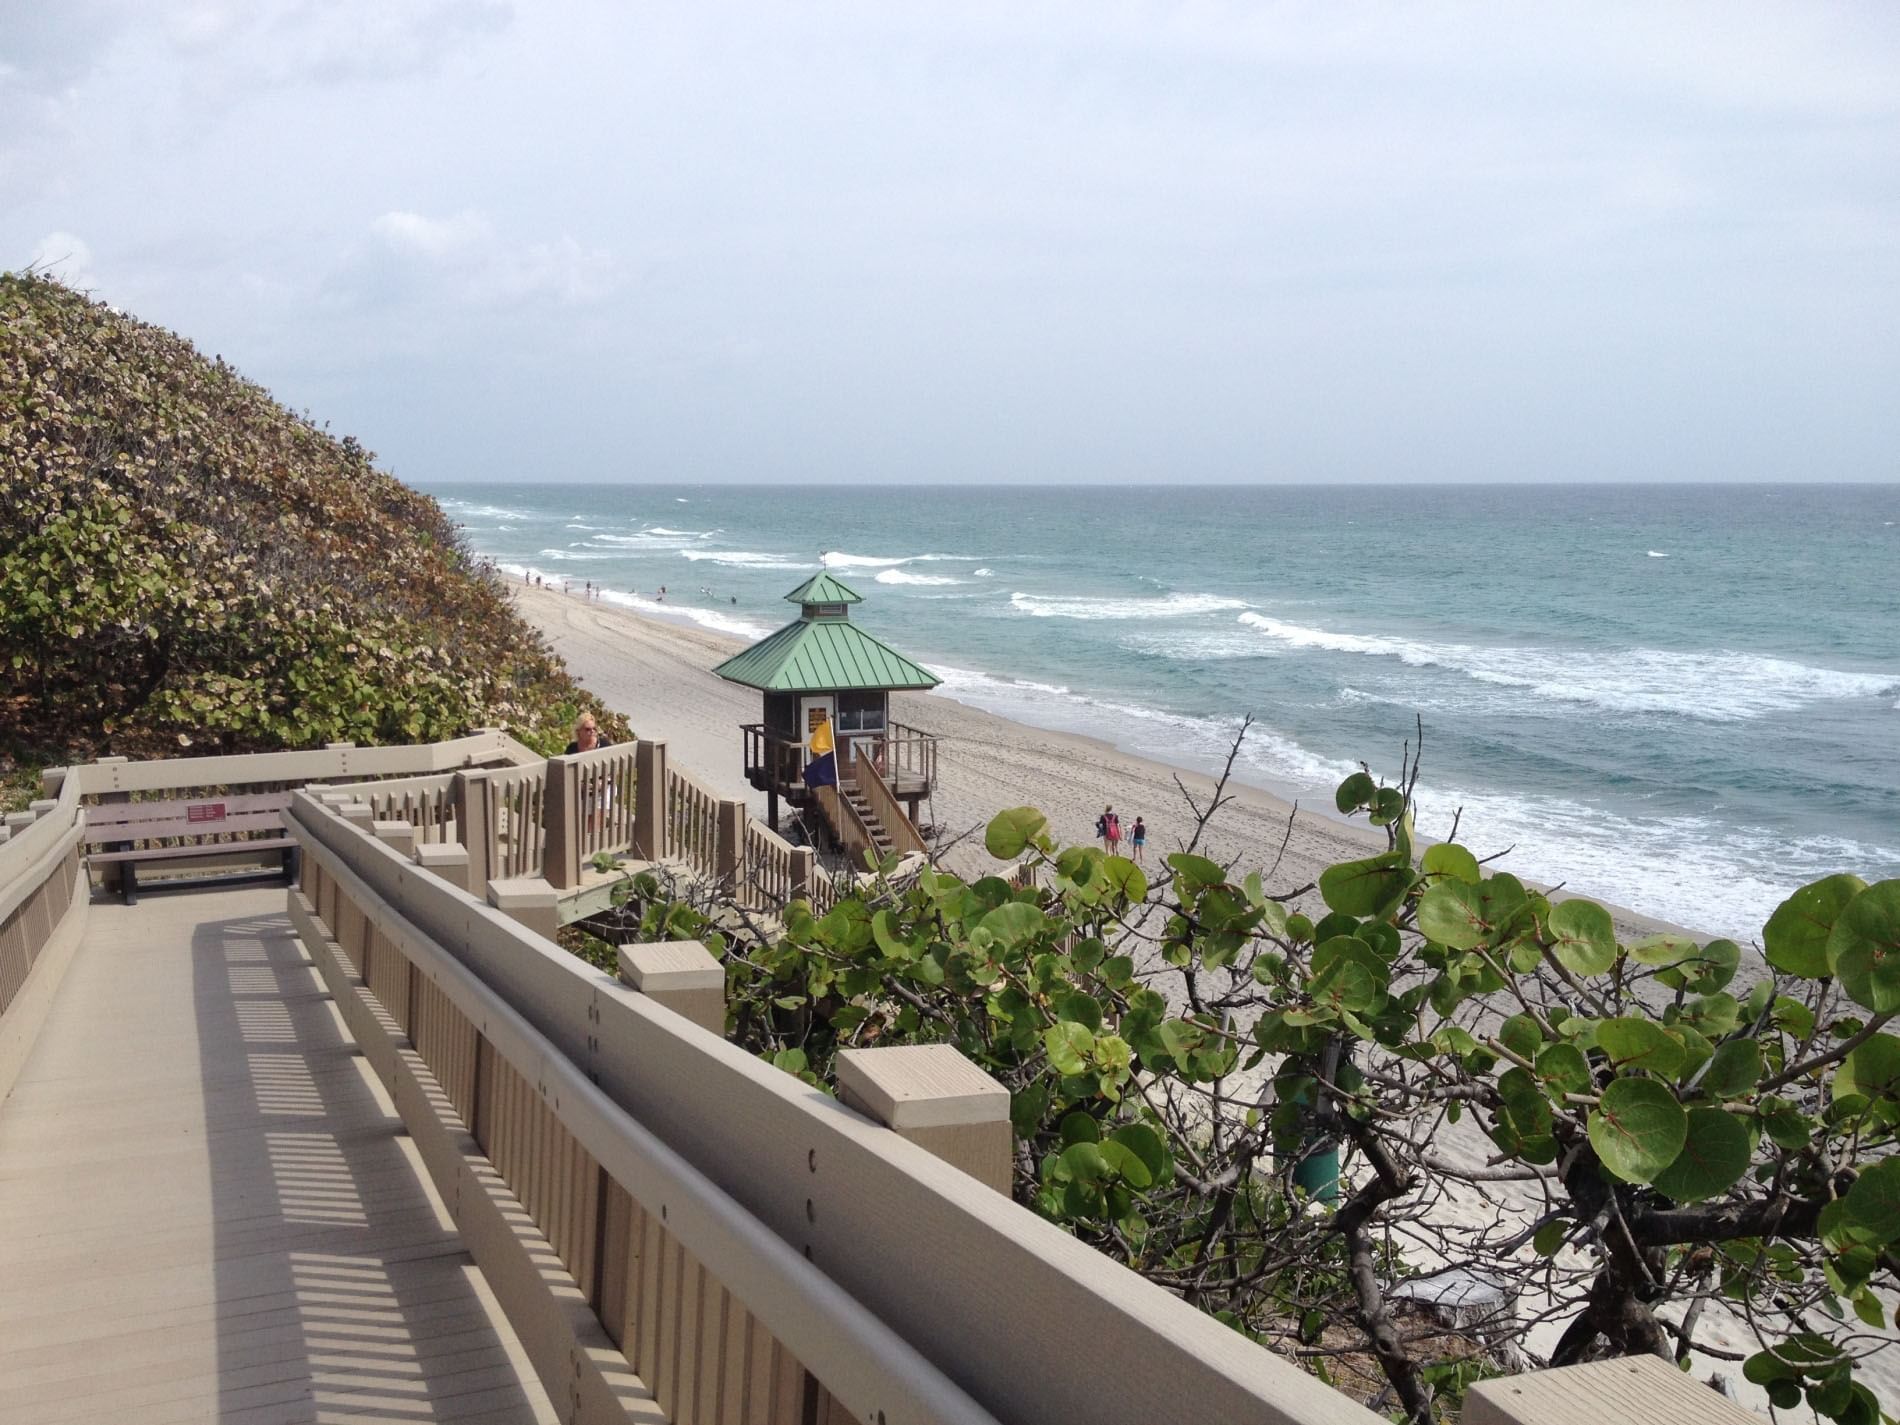 Ocean view from a balcony in Red Reef Park near Ocean Lodge Boca Raton